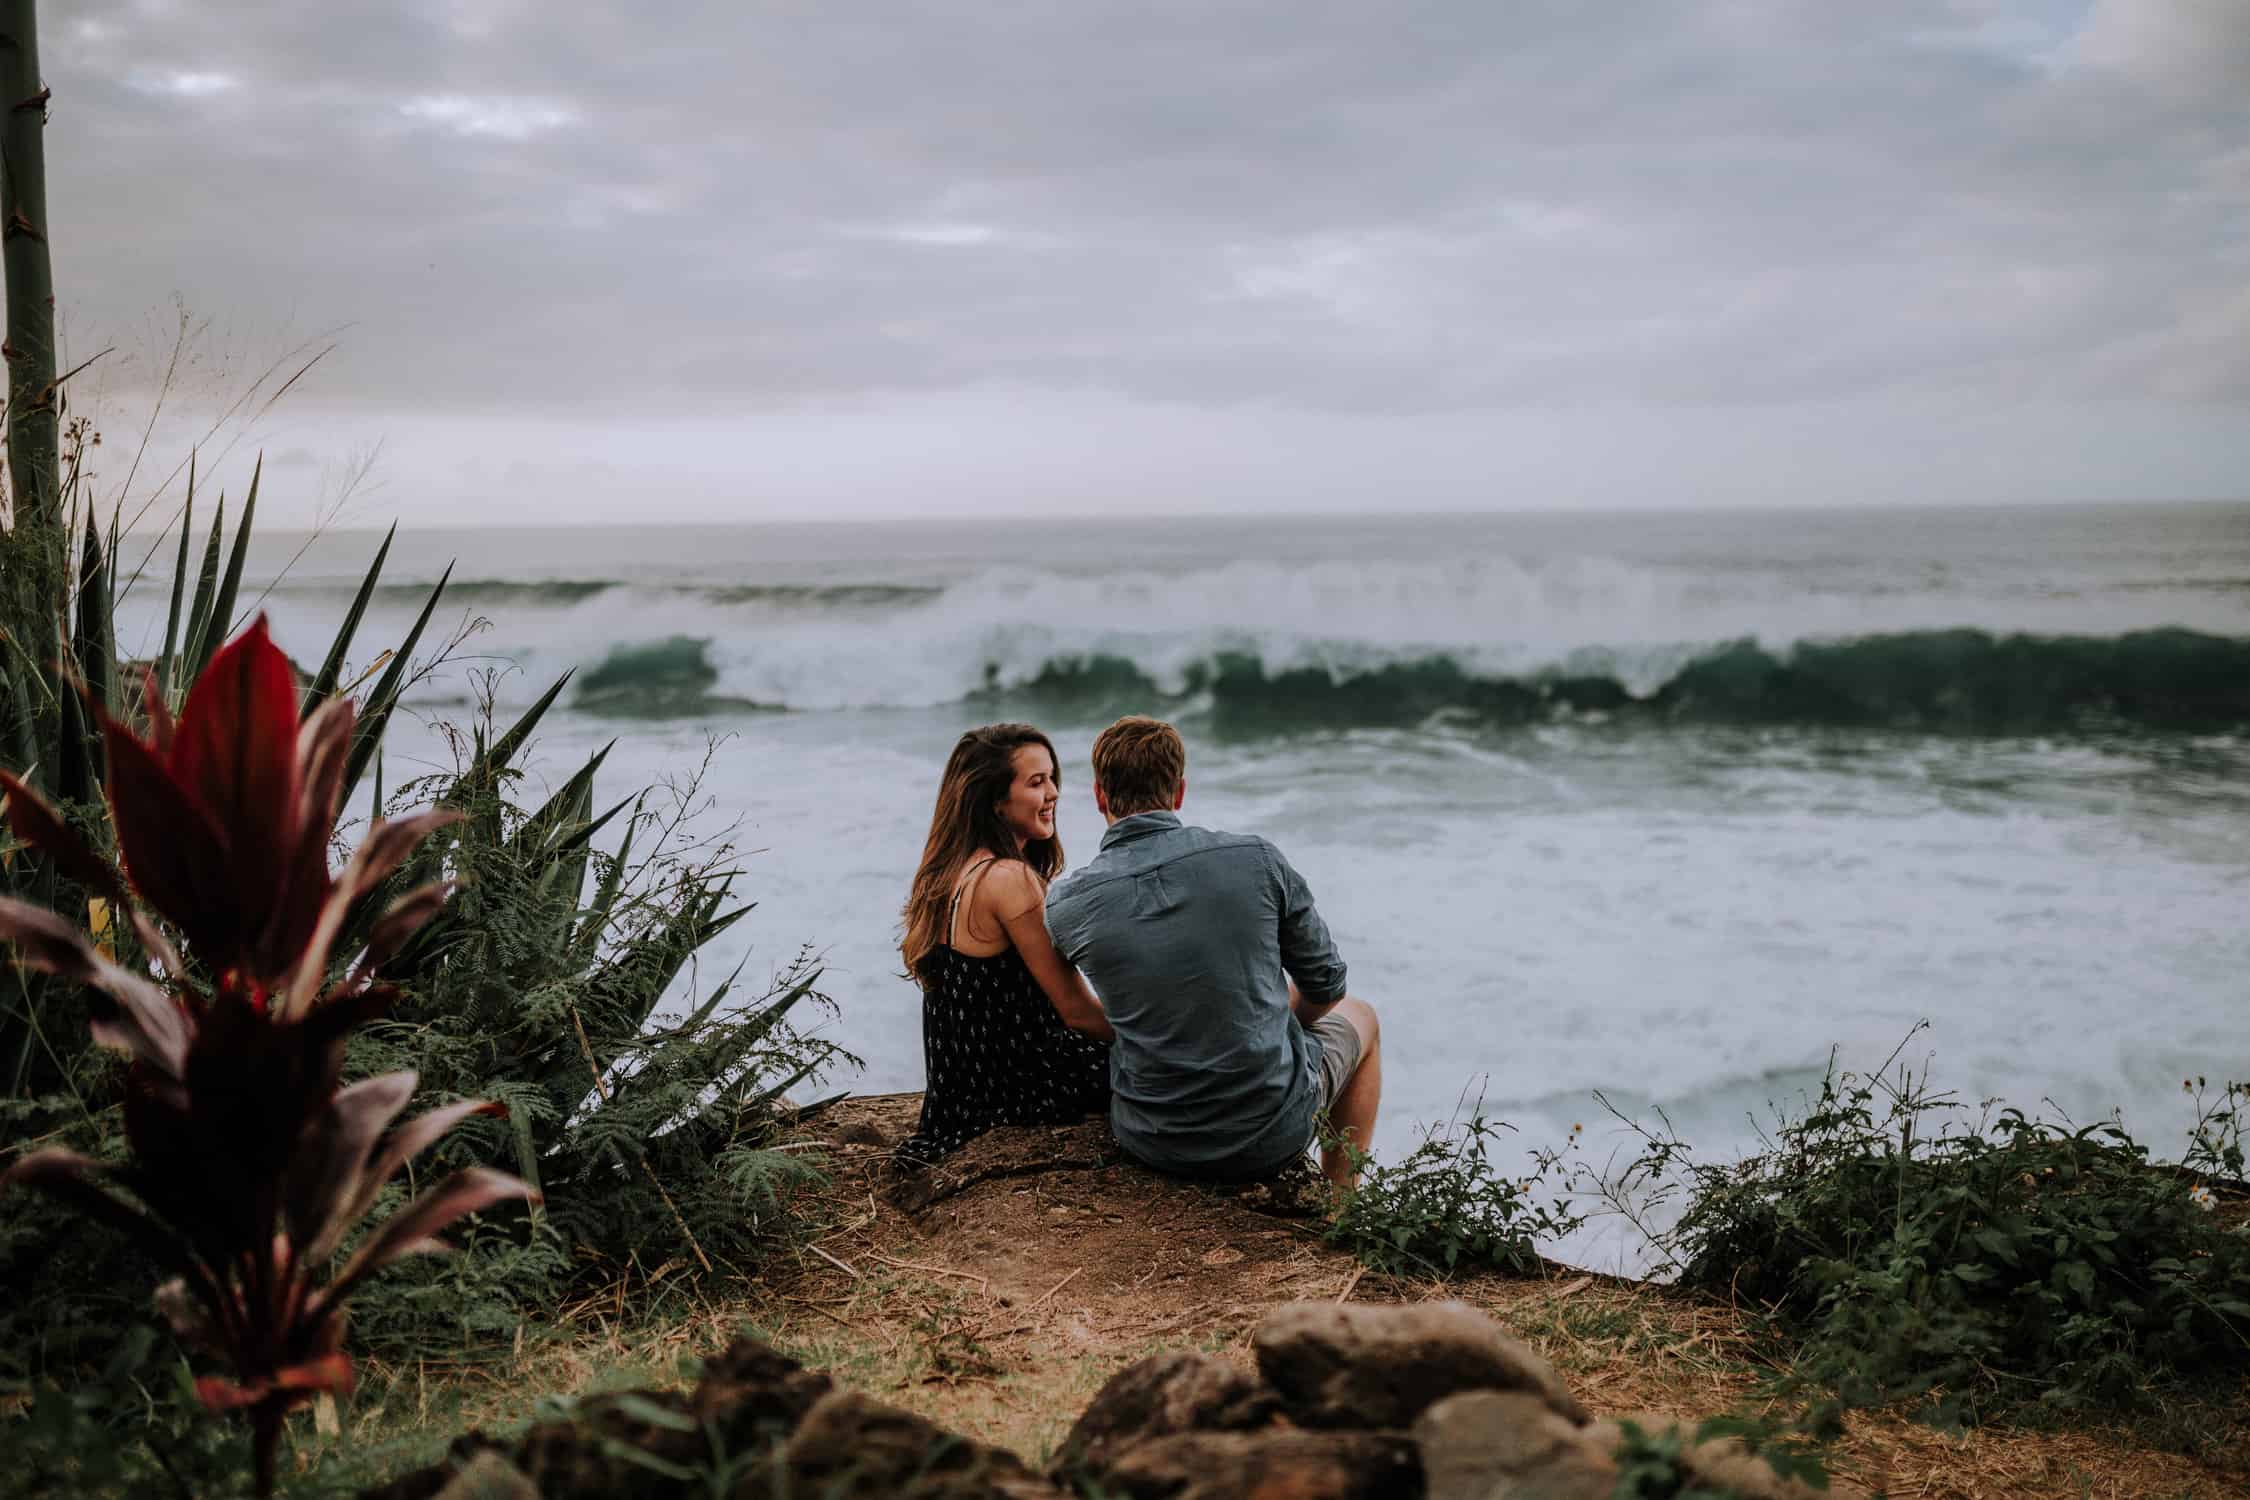 ENGAGEMENT PACKAGES ON OAHU HAWAII